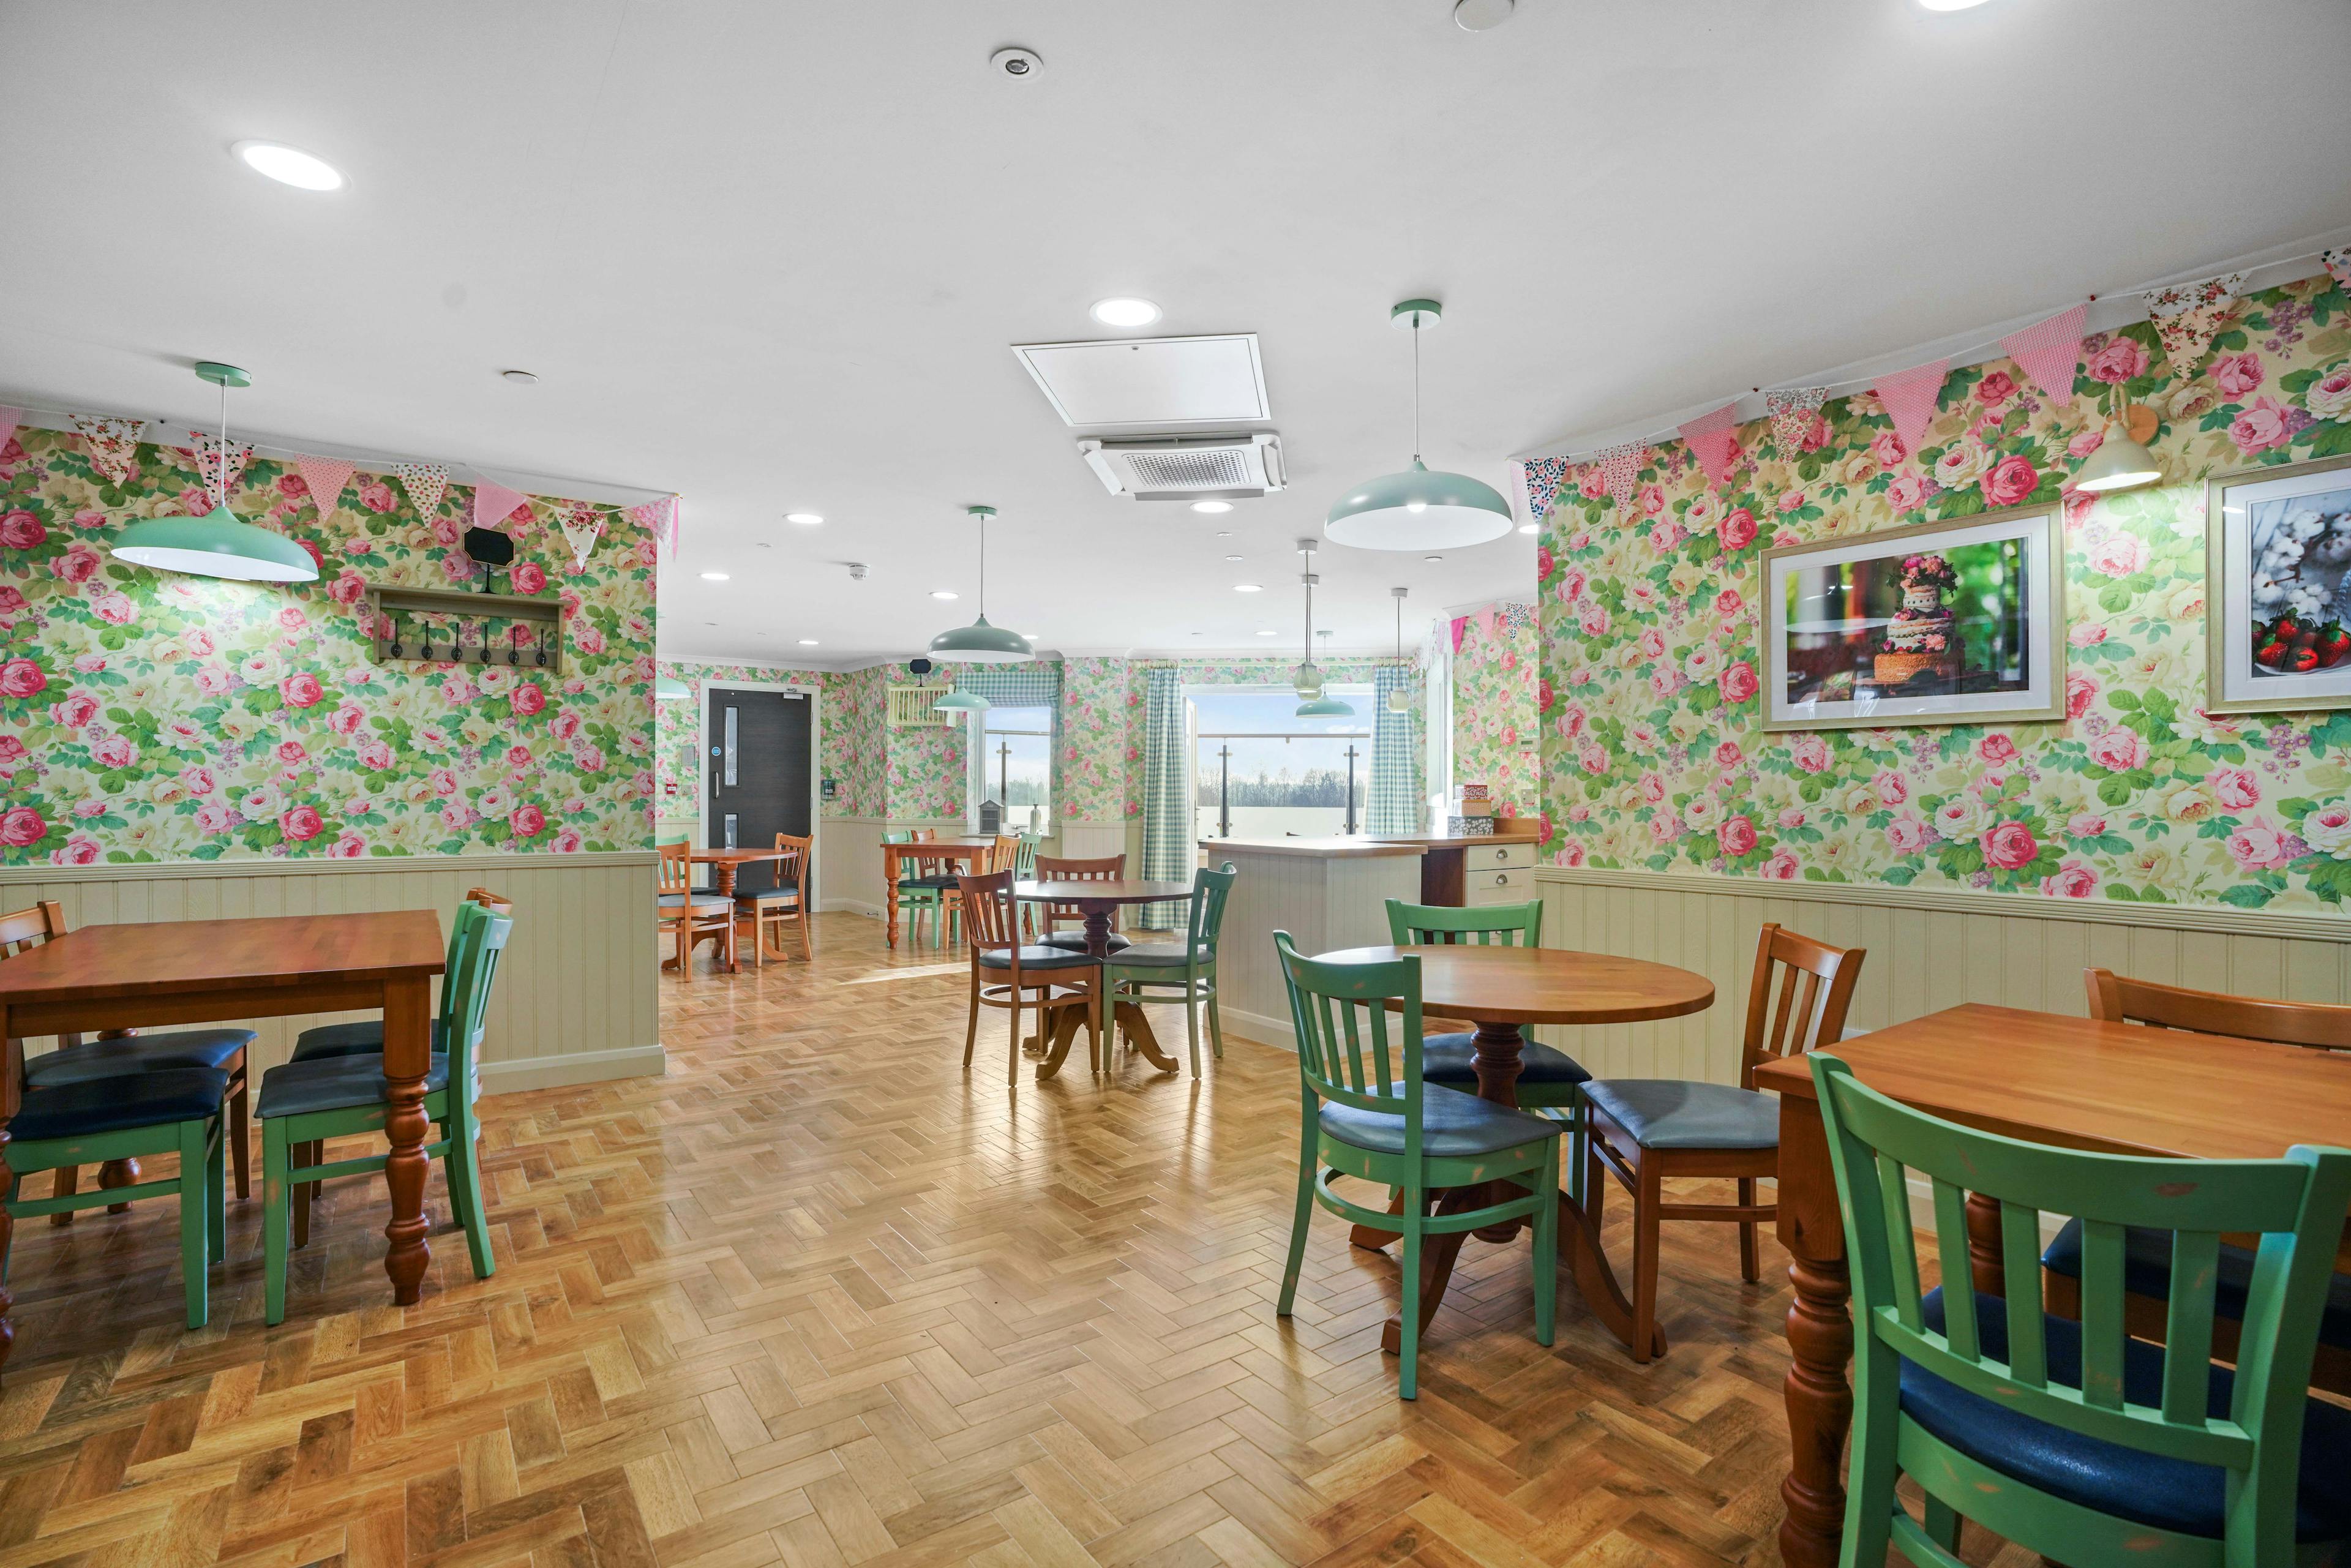 Dining area of Cedar Falls care home in Spalding, Lincolnshire